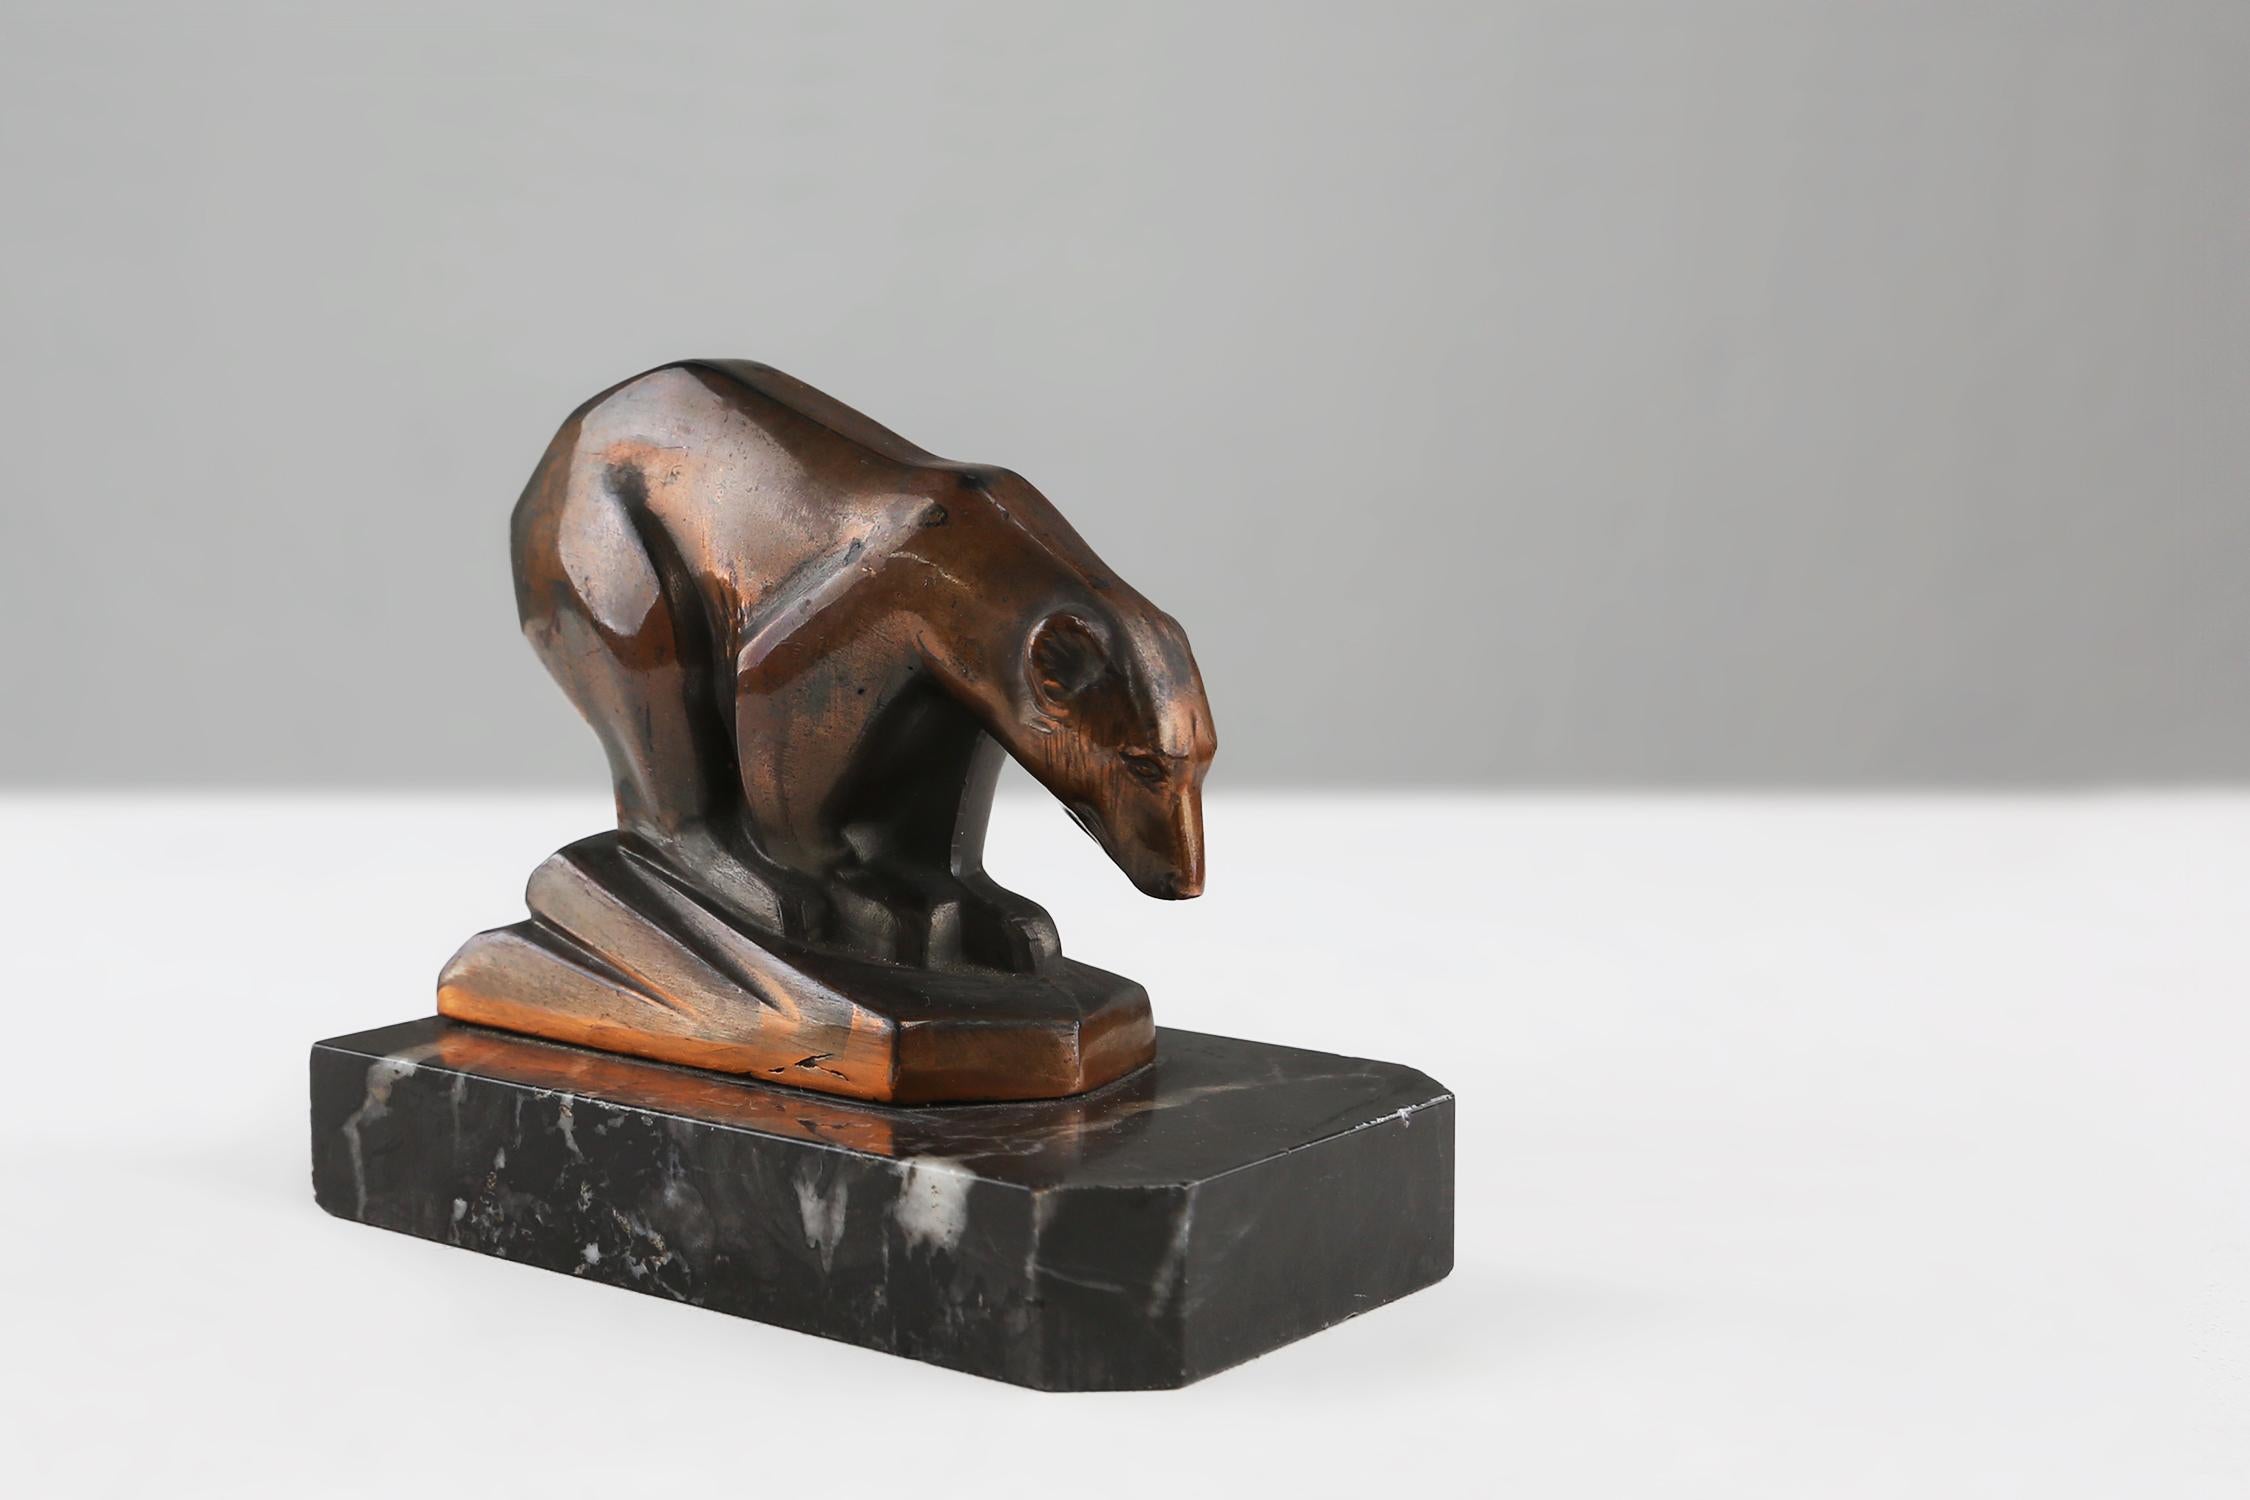 This beautiful Art Deco polar bear figurine is a masterpiece of craftsmanship and design. Made of high-quality Metal, this statue has a beautiful brown patina that shows off the elegance and finesse of the polar bear.

It stands on a black marble